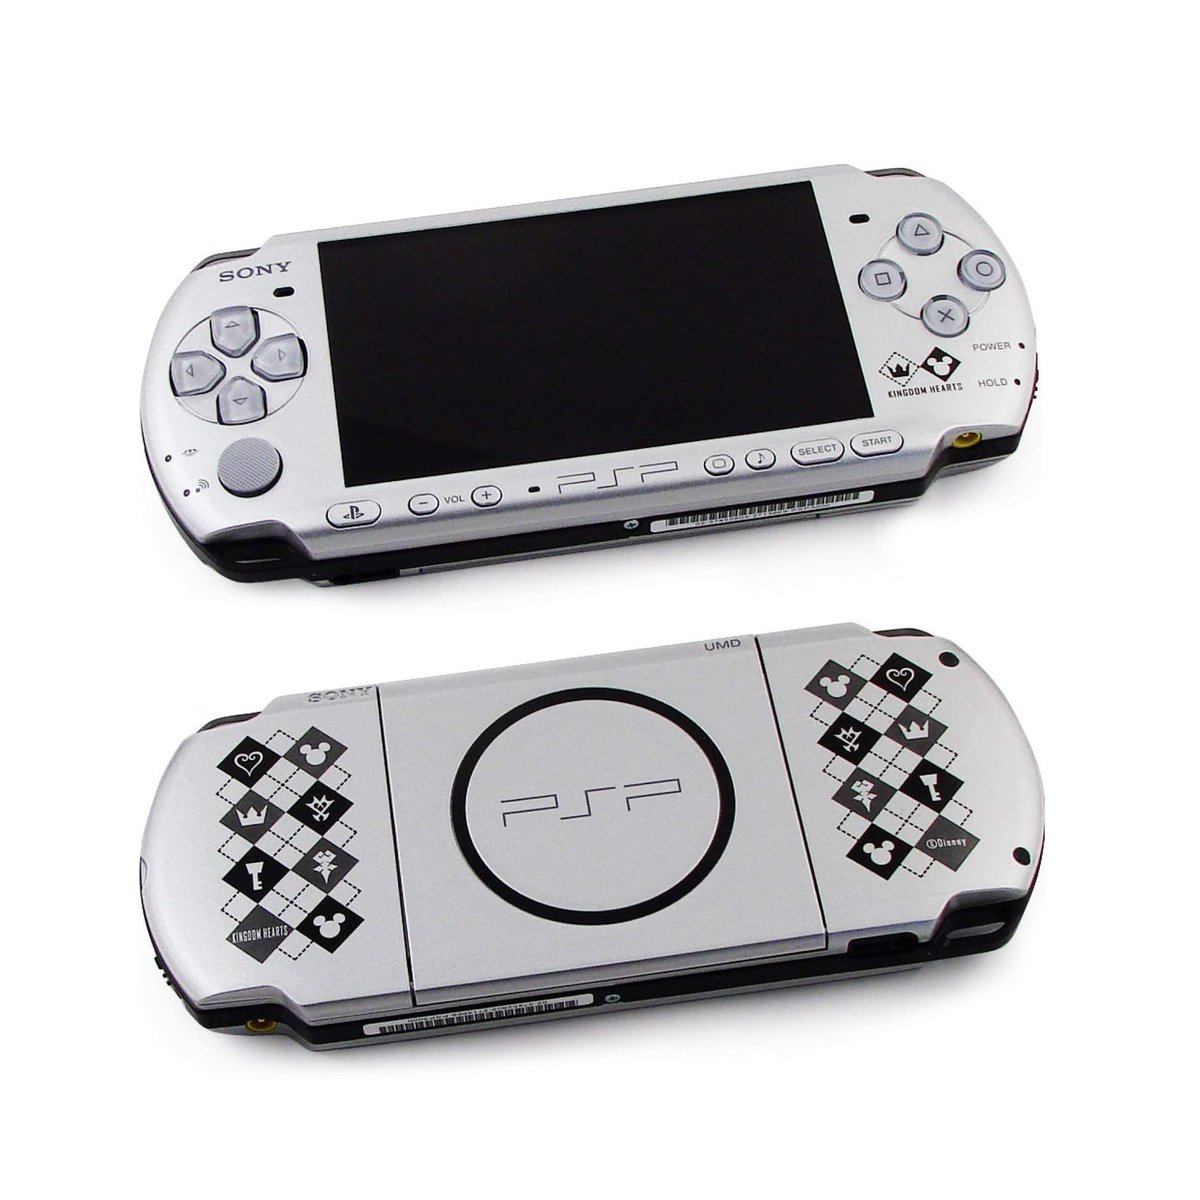 Kingdom Hearts Birth by Sleep made its debut on January 9, 2010, in Japan, accompanied by a limited edition PSP-3000 bundle that showcased designs inspired by the series on its back and was priced at ¥22,000 (USD$245).